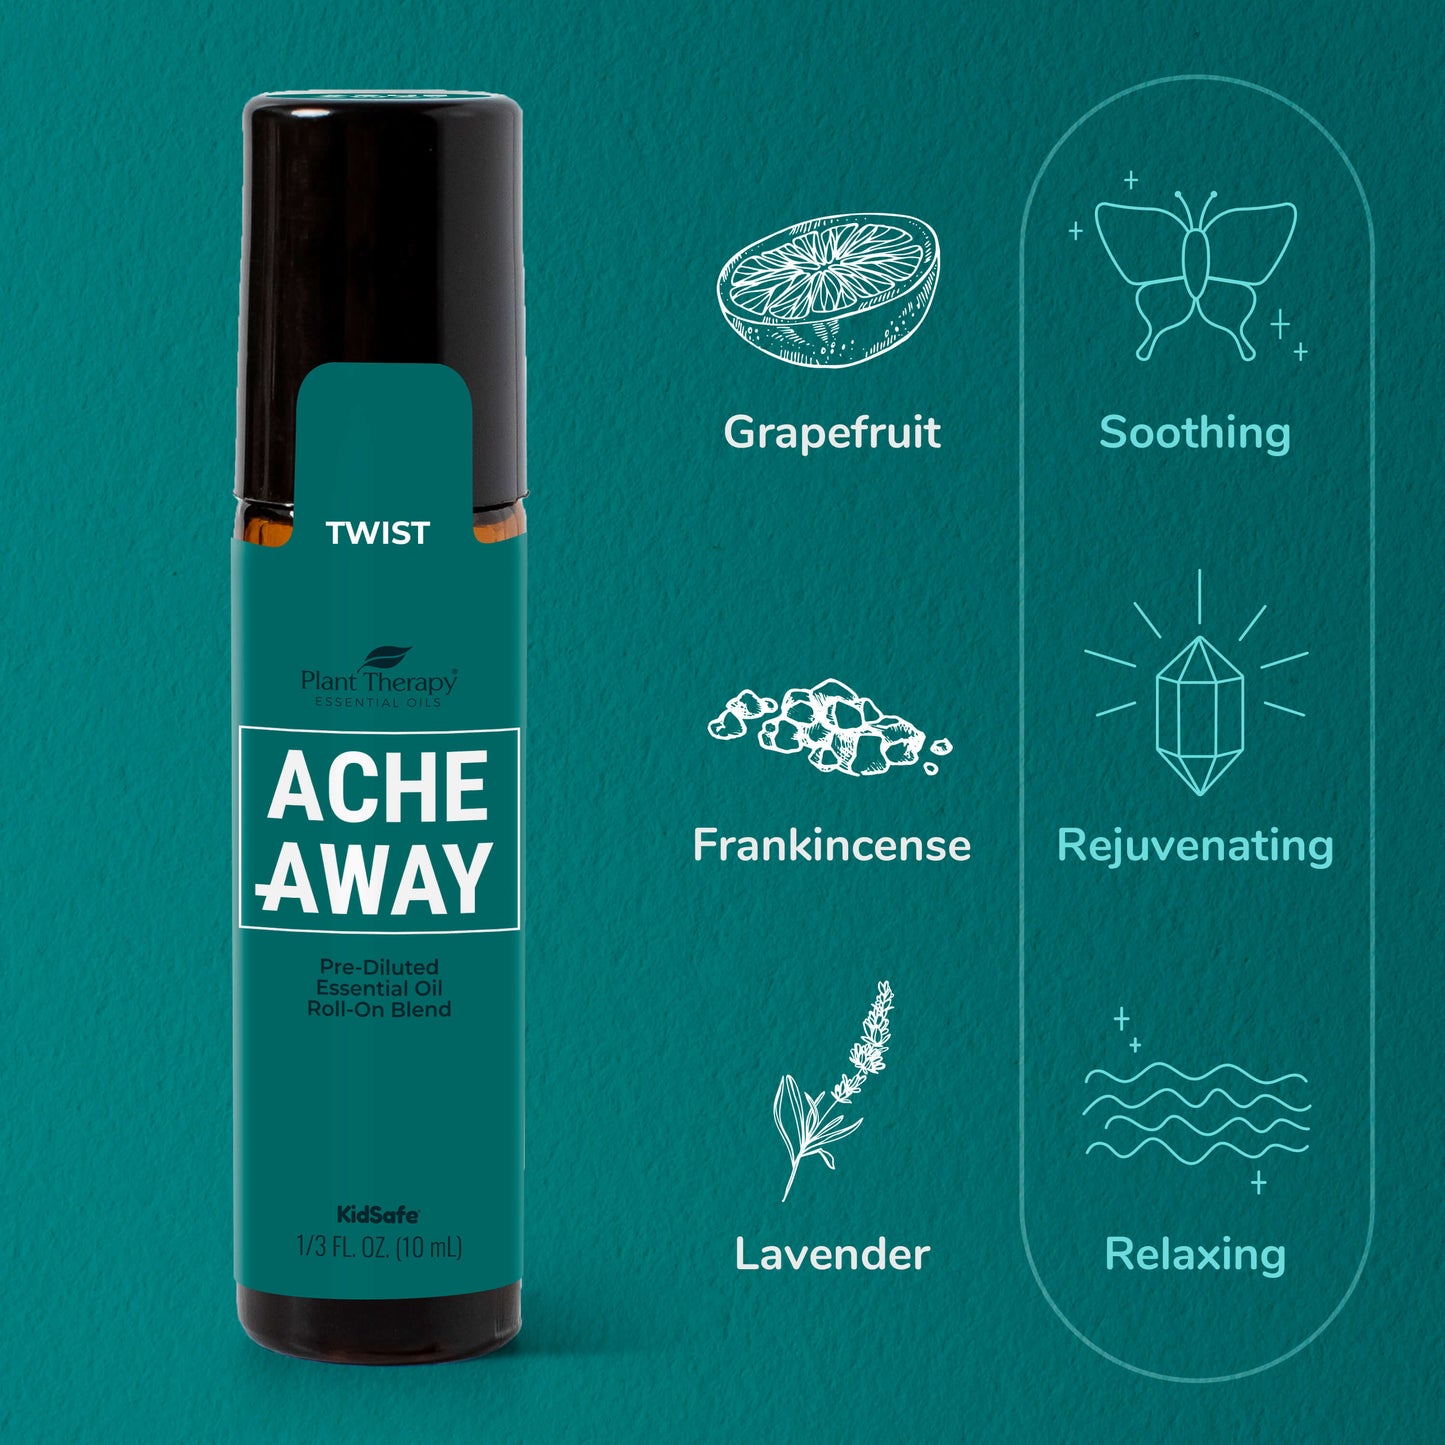 Ache Away Pre-Diluted Essential Oil Roll-On